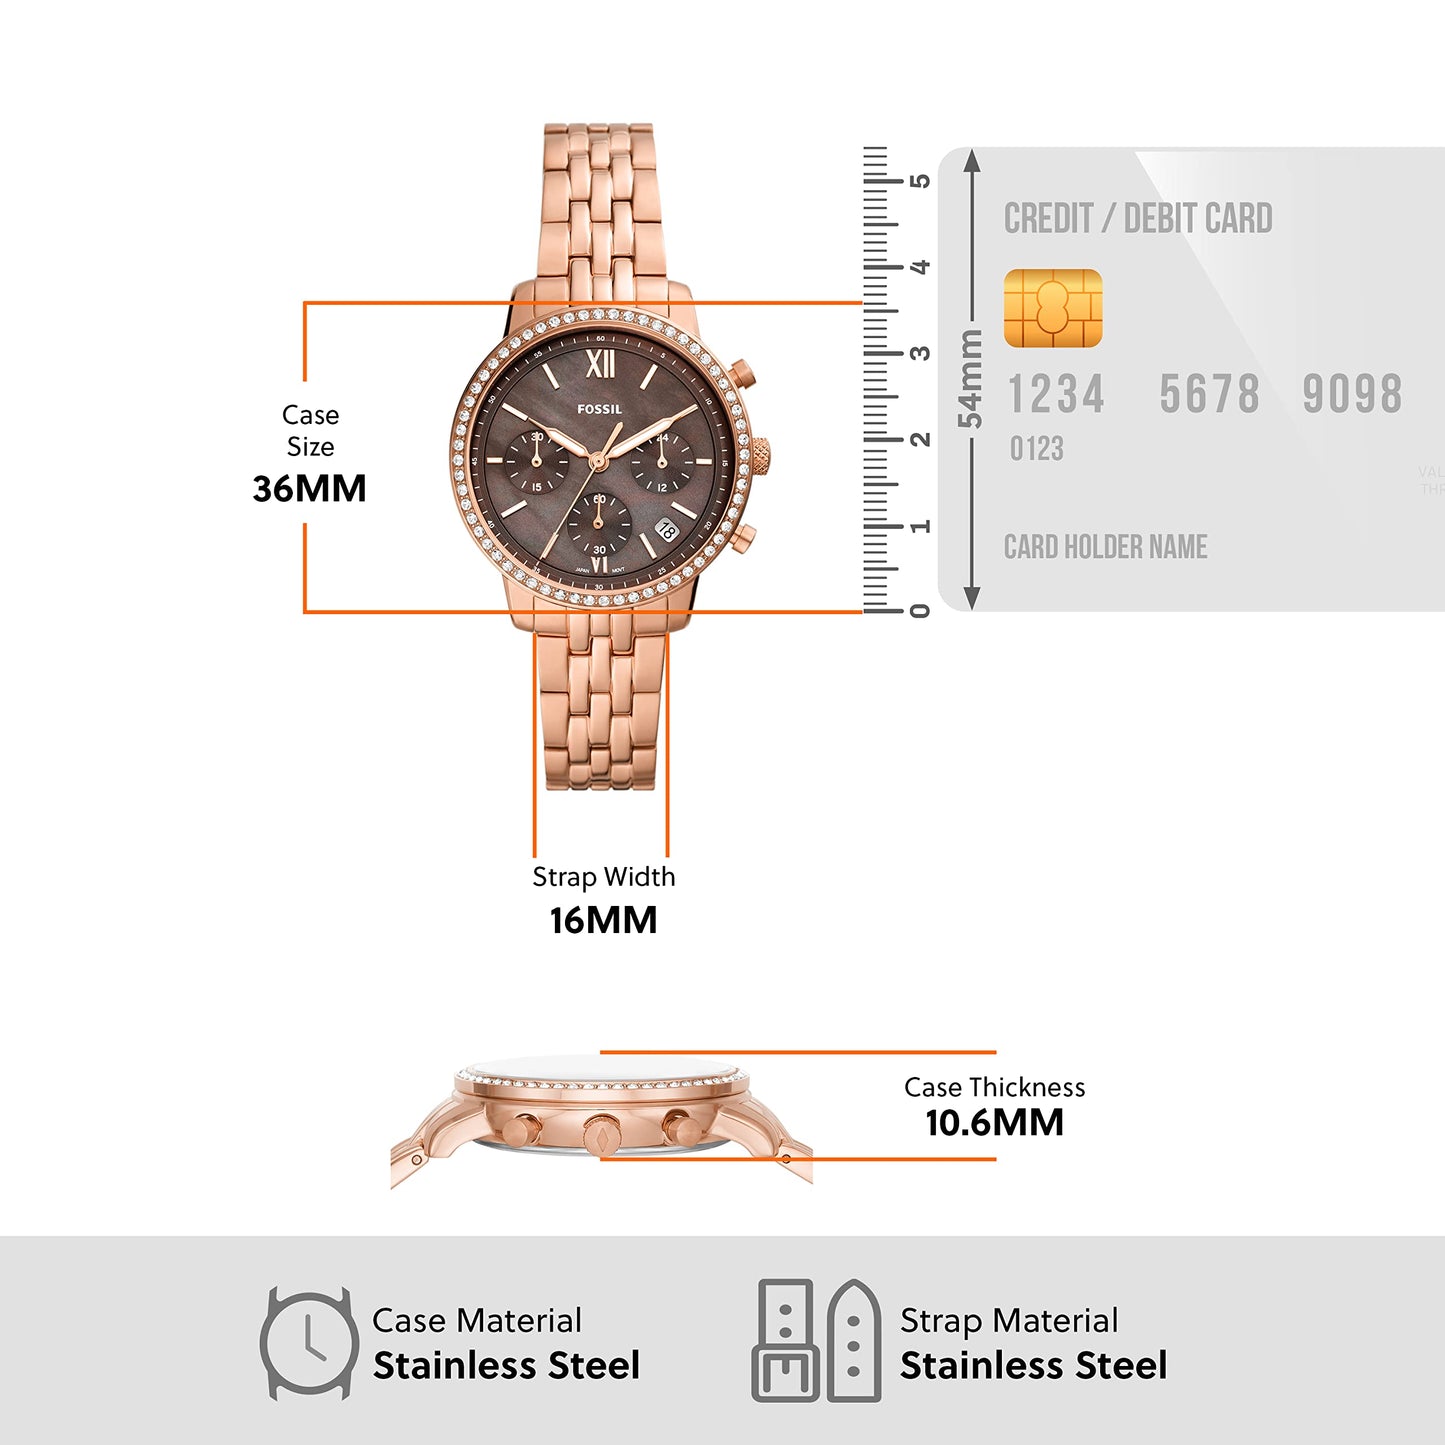 Fossil Women's Neutra Stainless Steel Quartz Chronograph Watch, Rose Gold, One Size, Neutra Chronograph Watch - ES5218